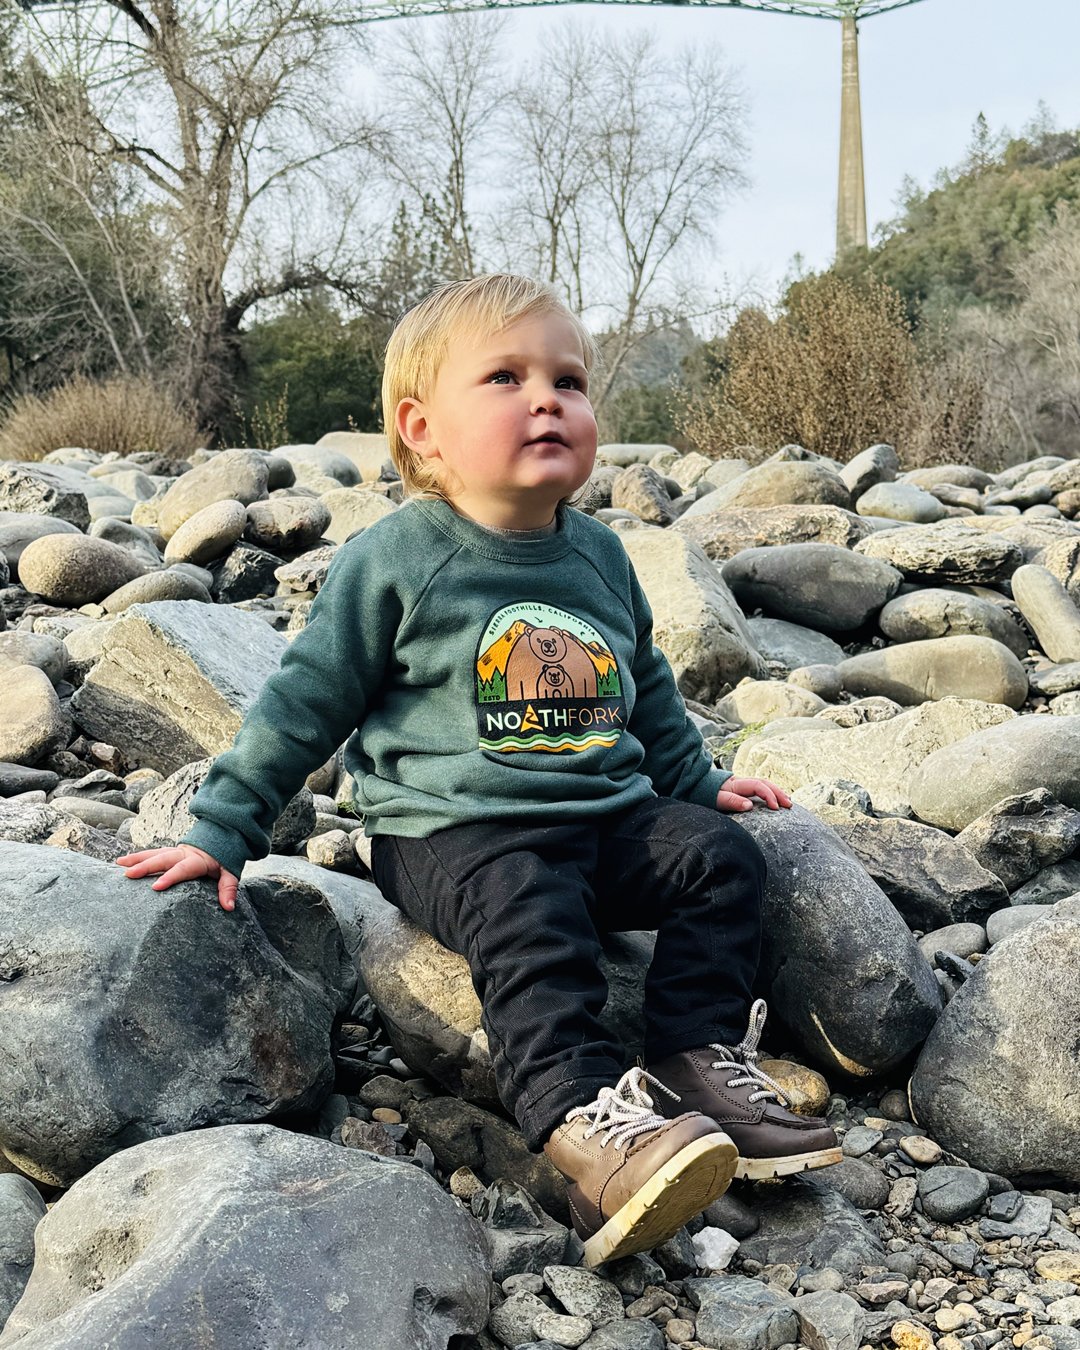 For the little NorthFork cub in your life. 🐻

#northforkclothing #northforkamericanriver #americanriver #norcal #mamabear #northerncalifornia #auburncalifornia #auburnca #sierranevadafoothills #visitplacercounty #placercounty